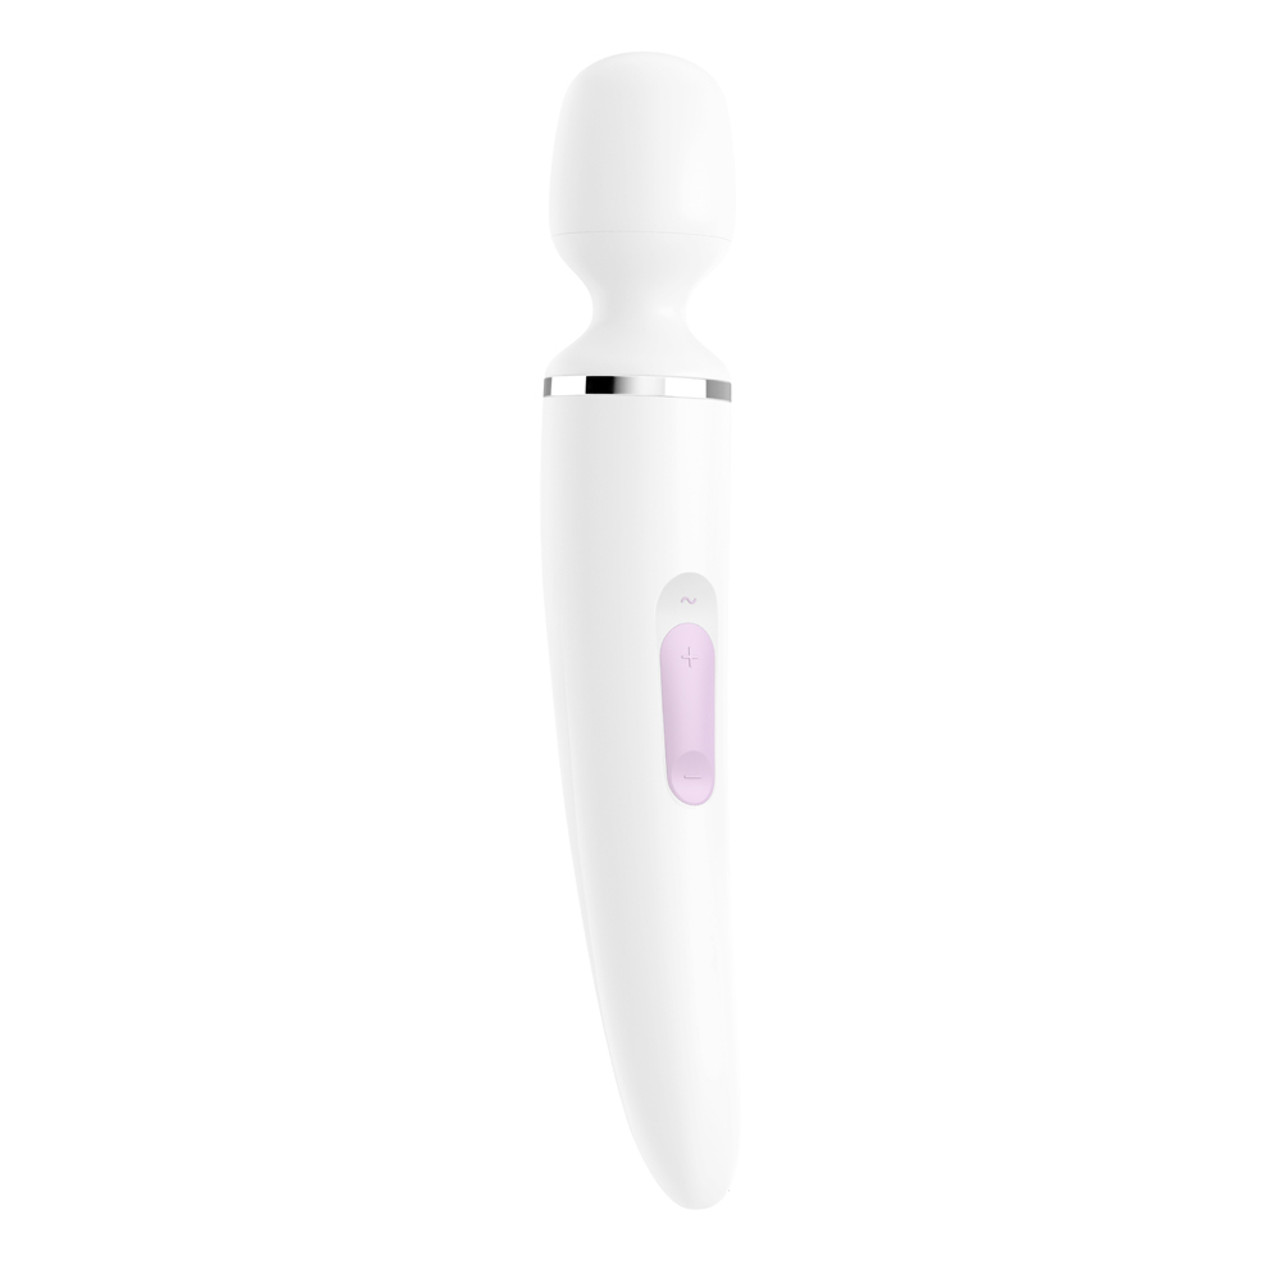 Buy the Wand-er Woman 50-function Rechargeable Silicone Wand Massager in White Pink and Chrome